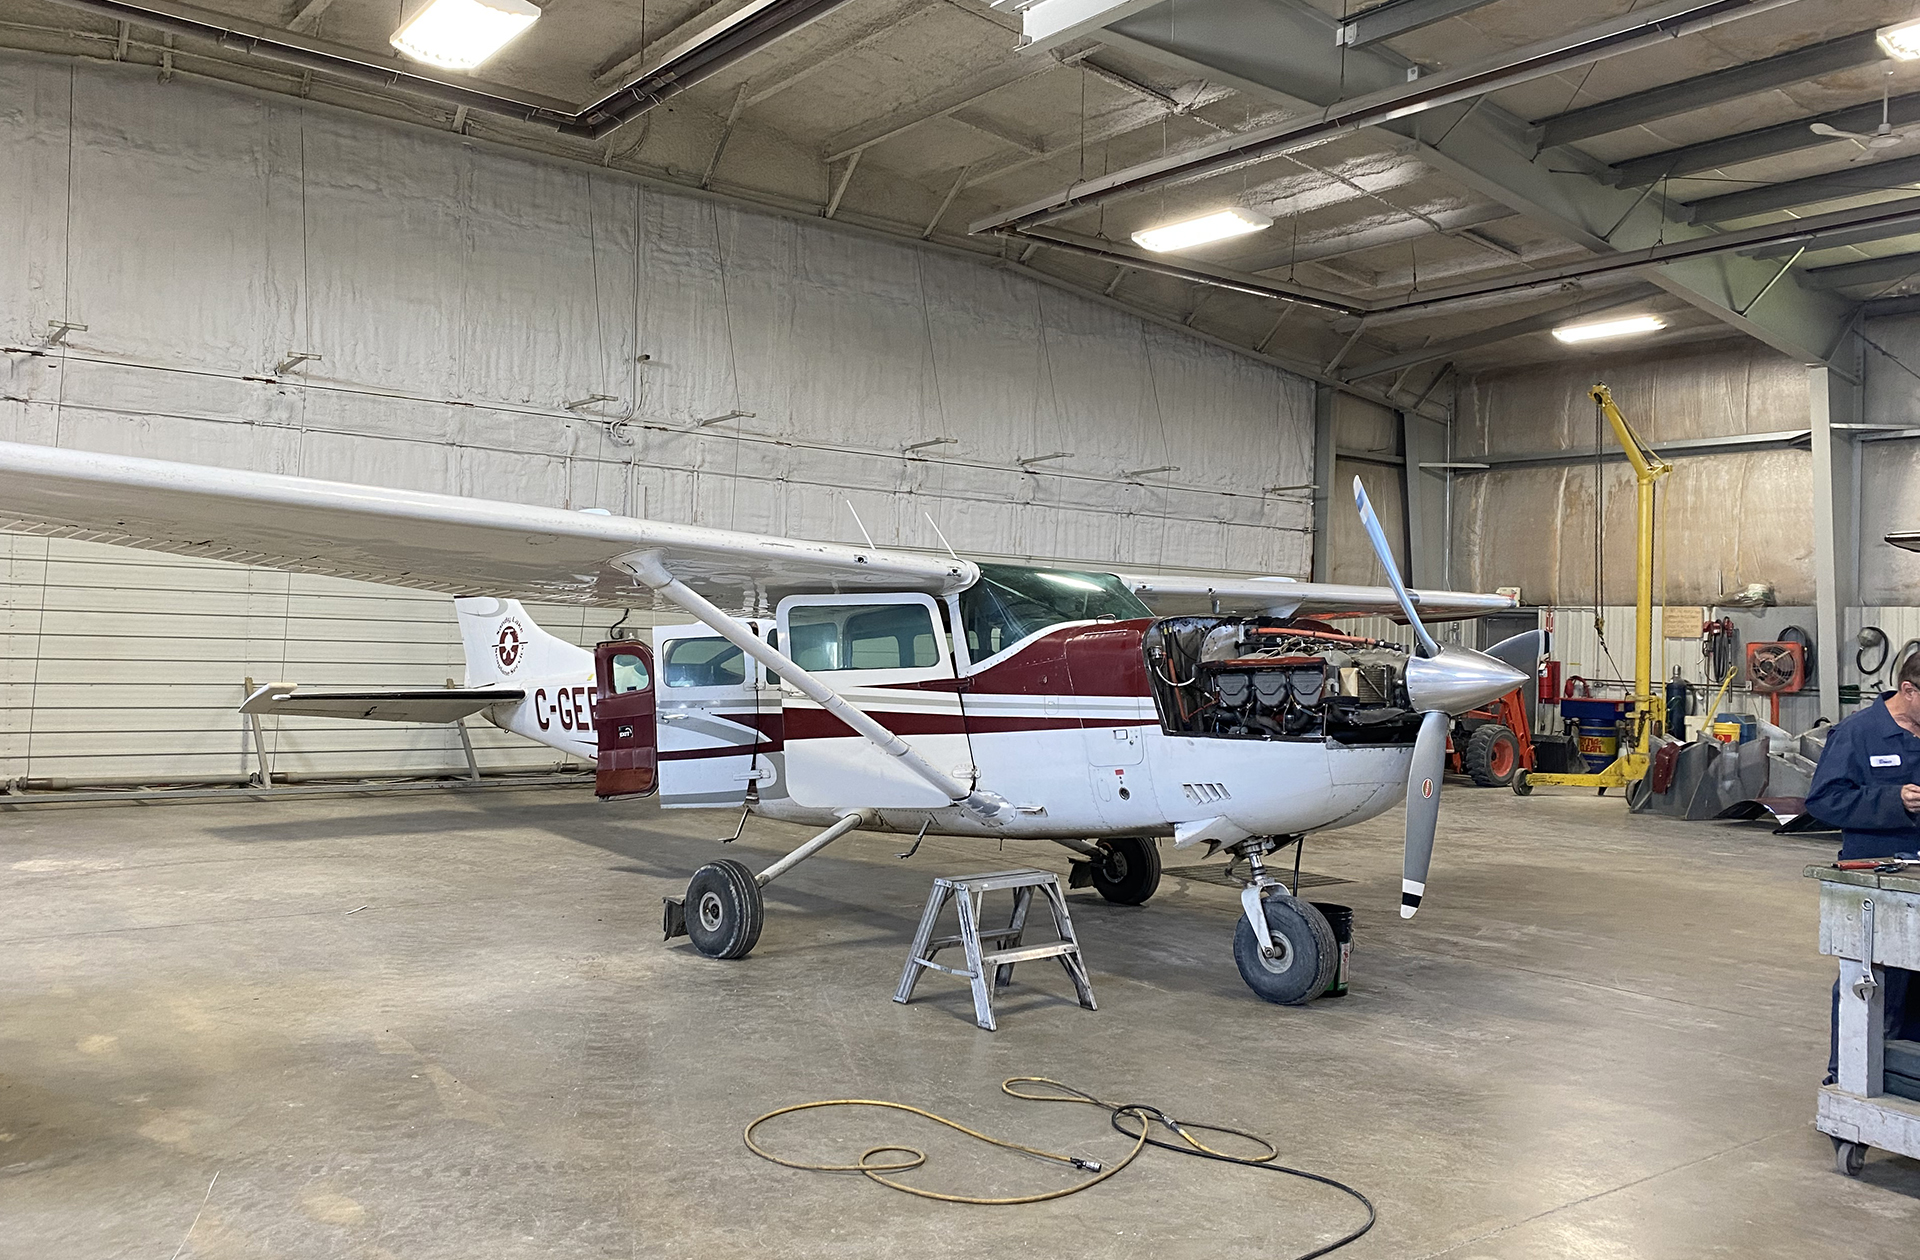 Riverside Aircraft Maintenance specialize in maintenance for floatplanes